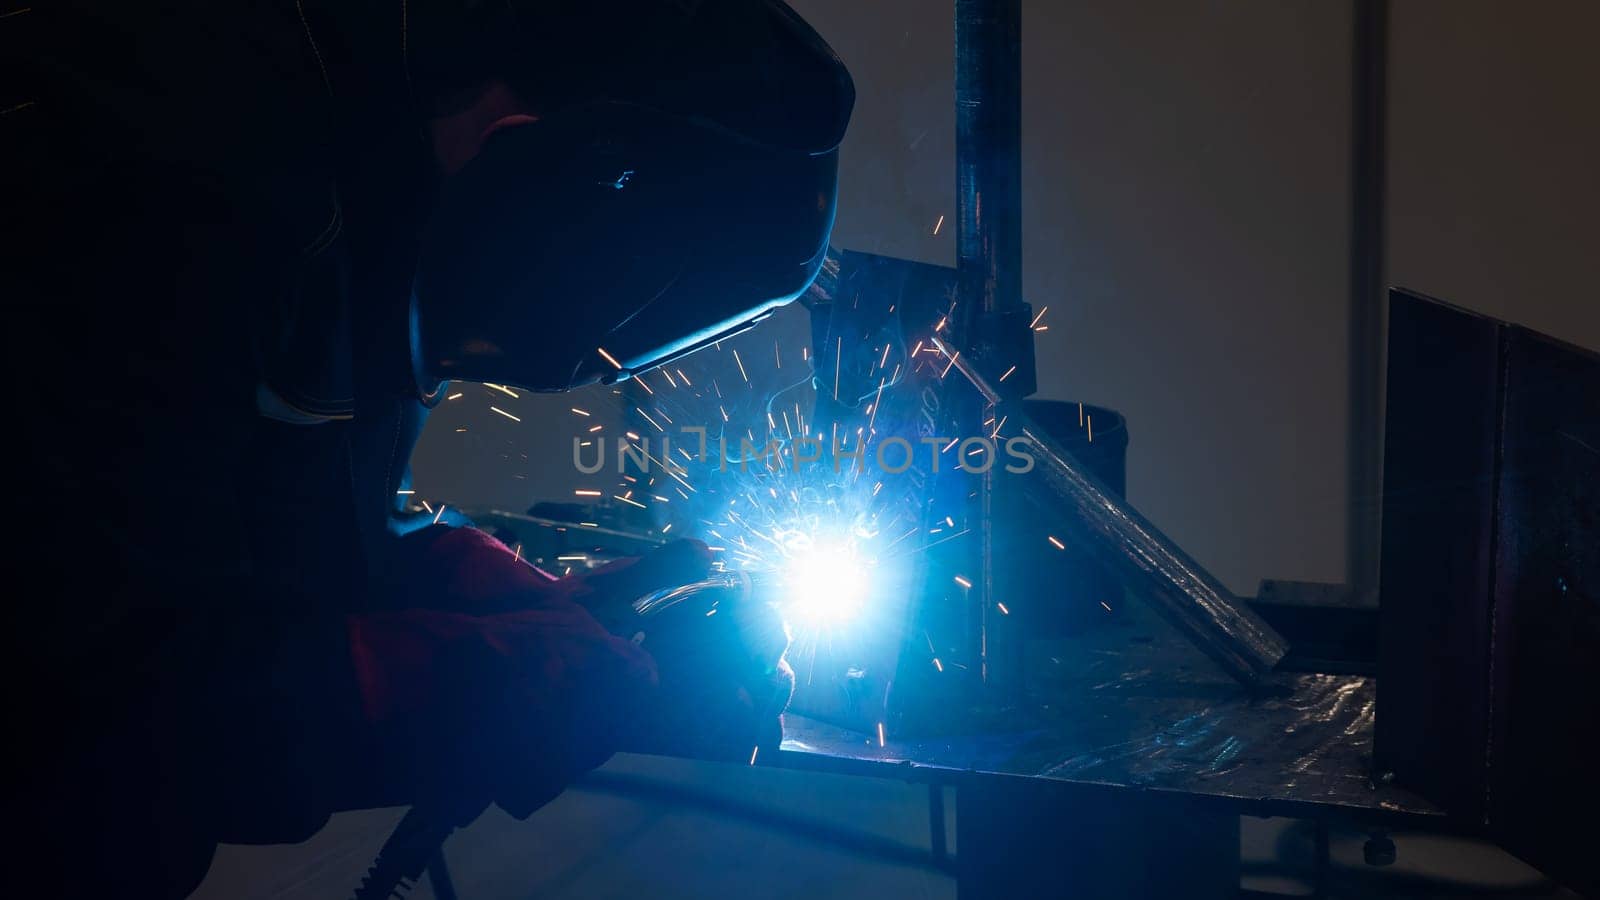 Competitions among welders. A man in a protective mask is welding. by mrwed54